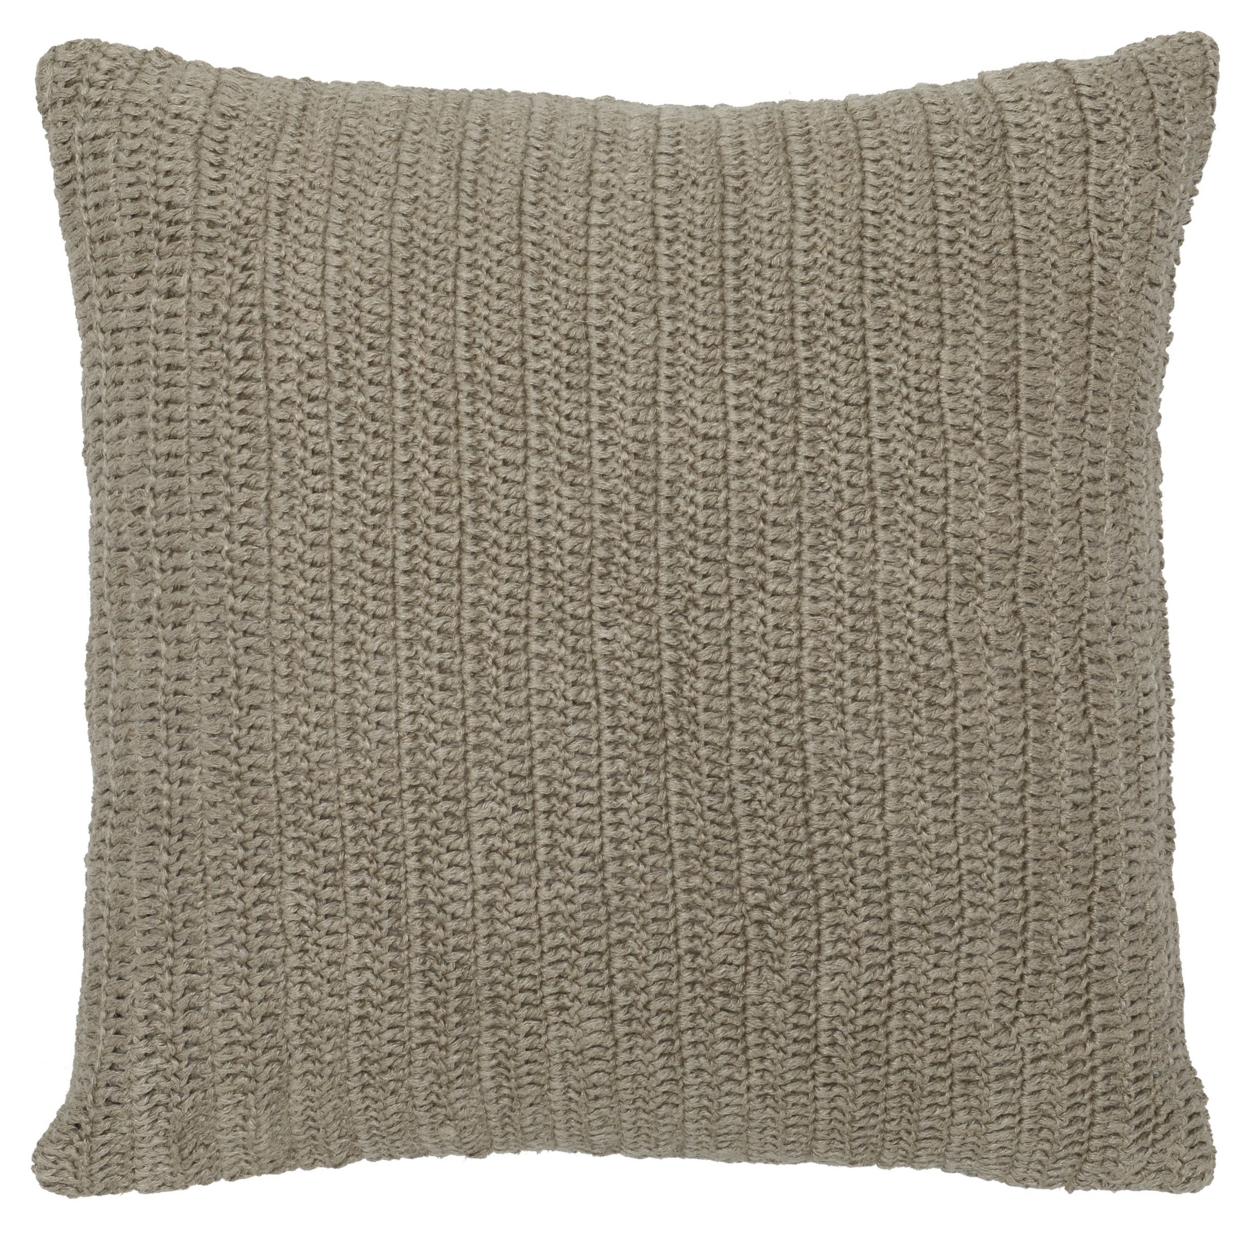 Square Fabric Throw Pillow With Hand Knit Details And Knife Edges, Brown- Saltoro Sherpi